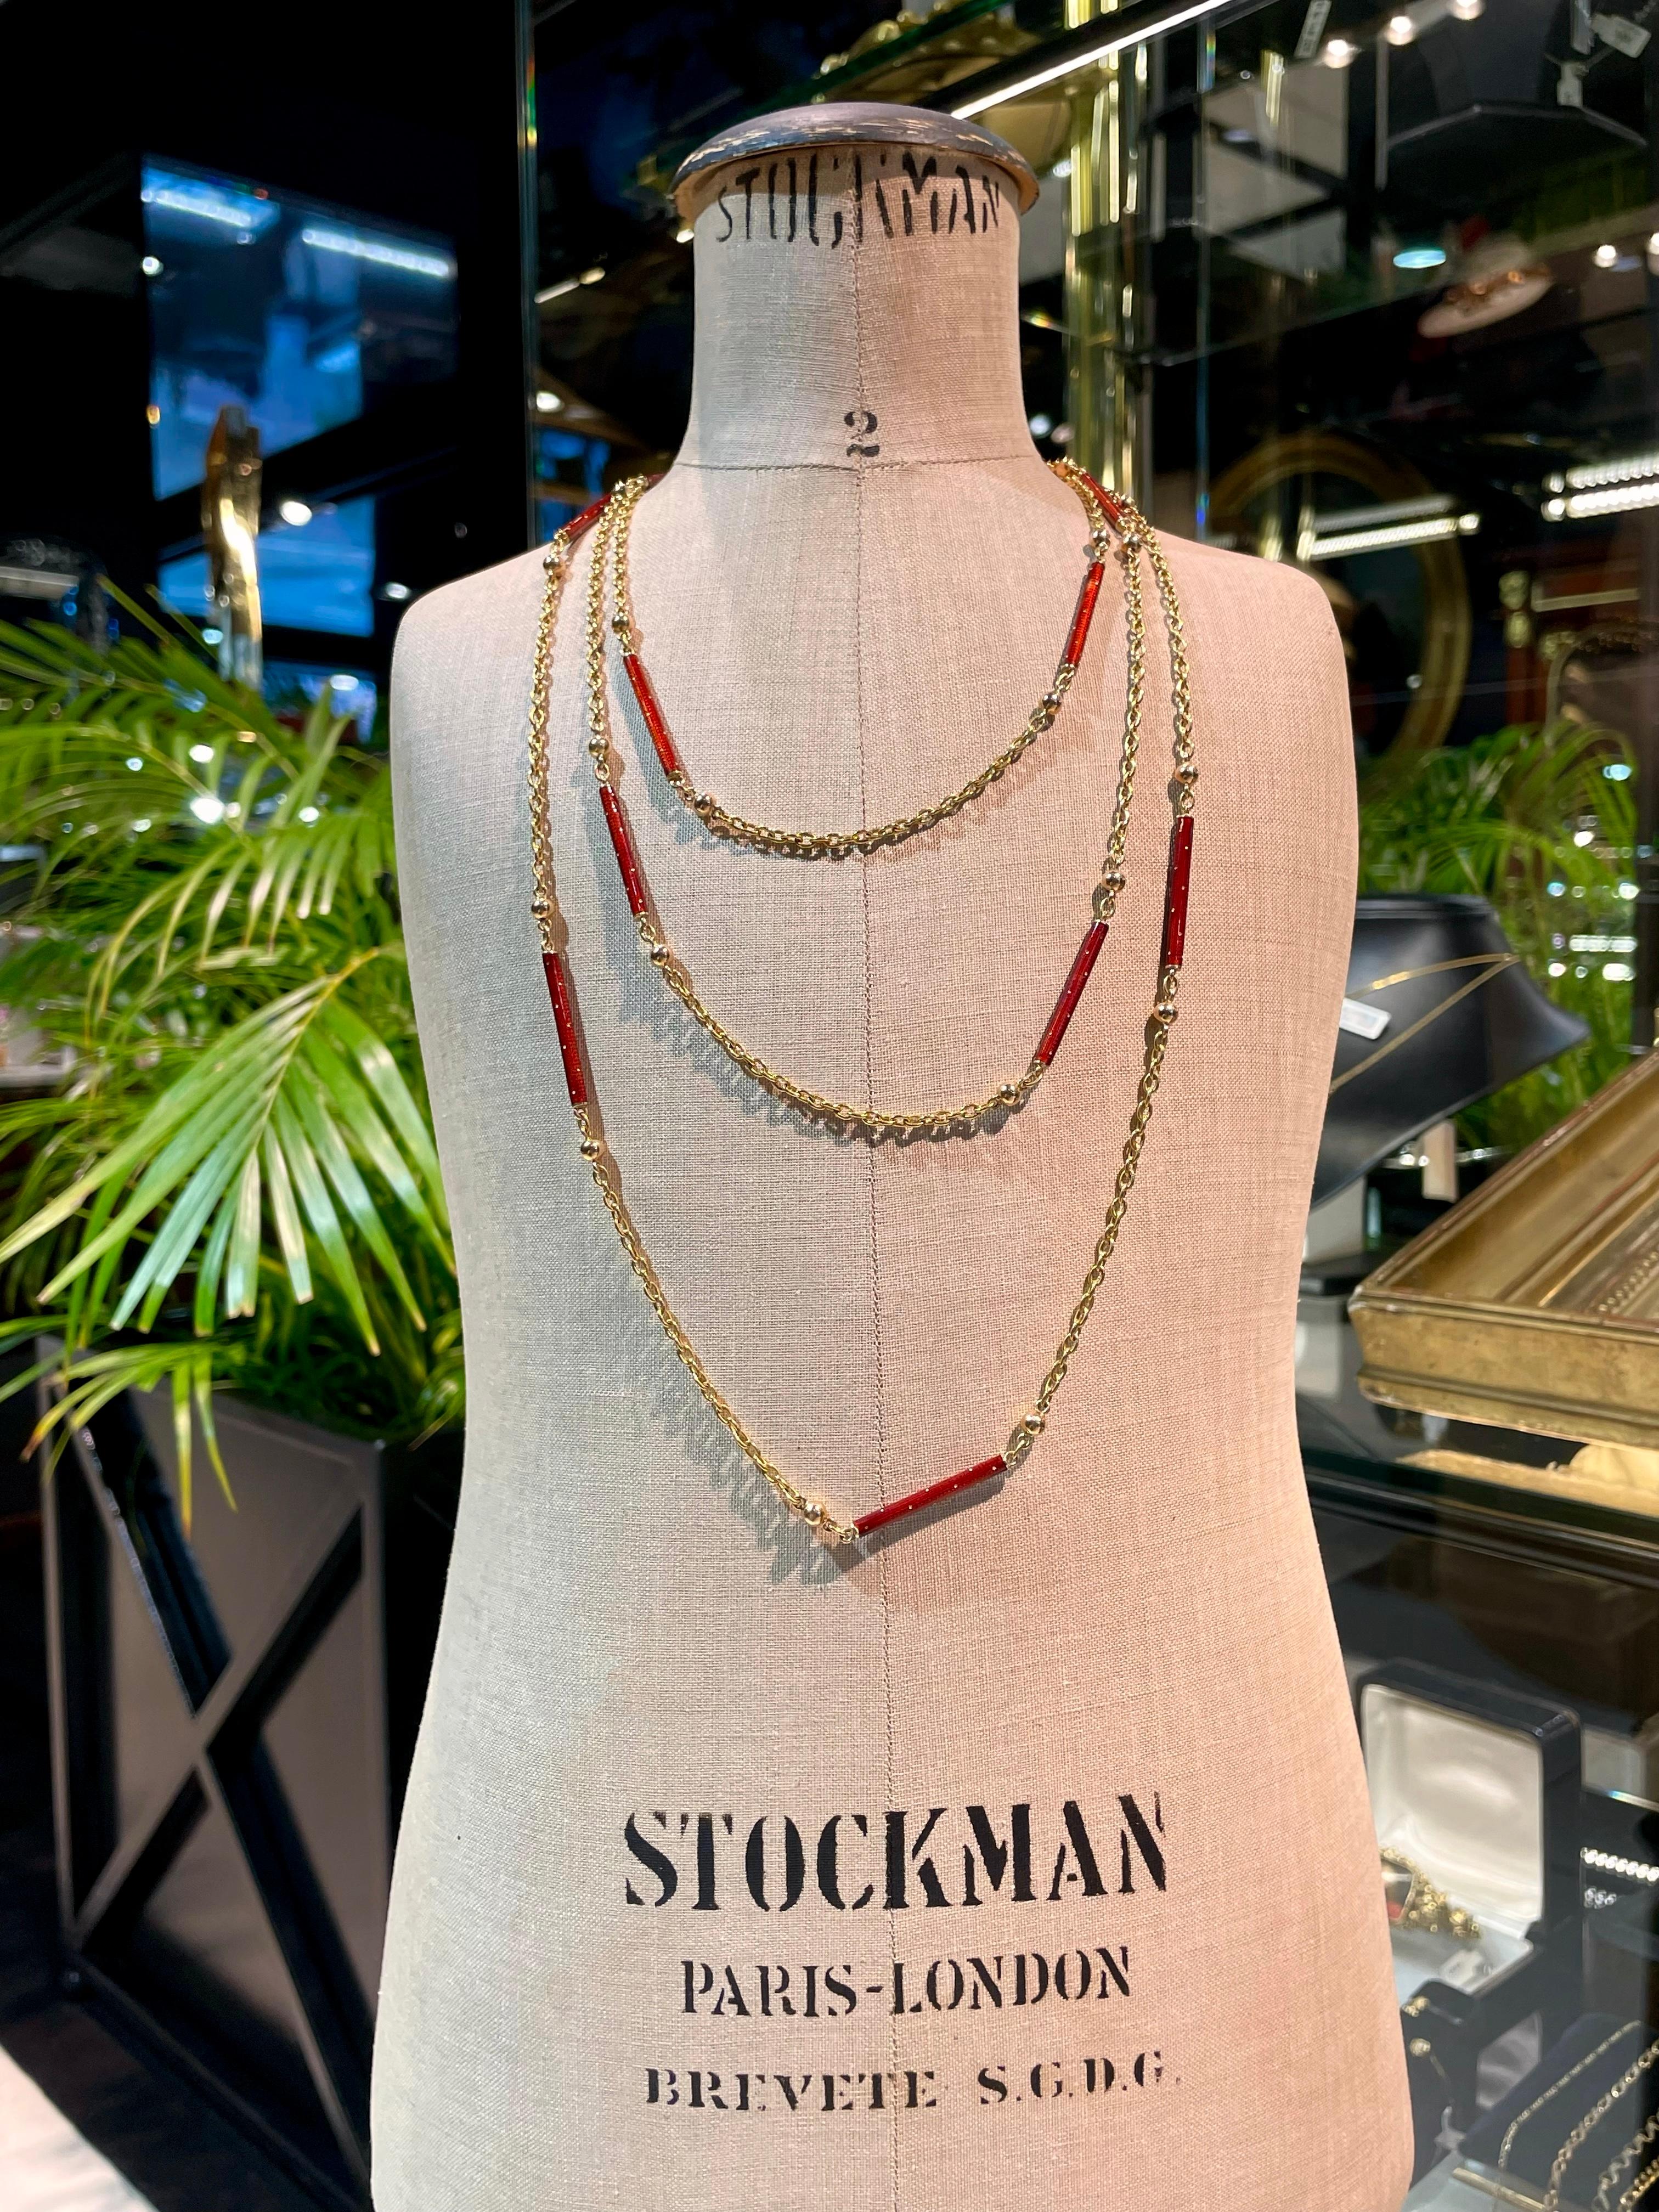 This is a gorgeous long Victorian chain necklace crafted in 18K yellow gold. It features 12 barrel sections adorned with red enamel with polka dots. 

Weight: 51.57g
Whole length: 152cm

———

If you have any questions, please feel free to ask. We